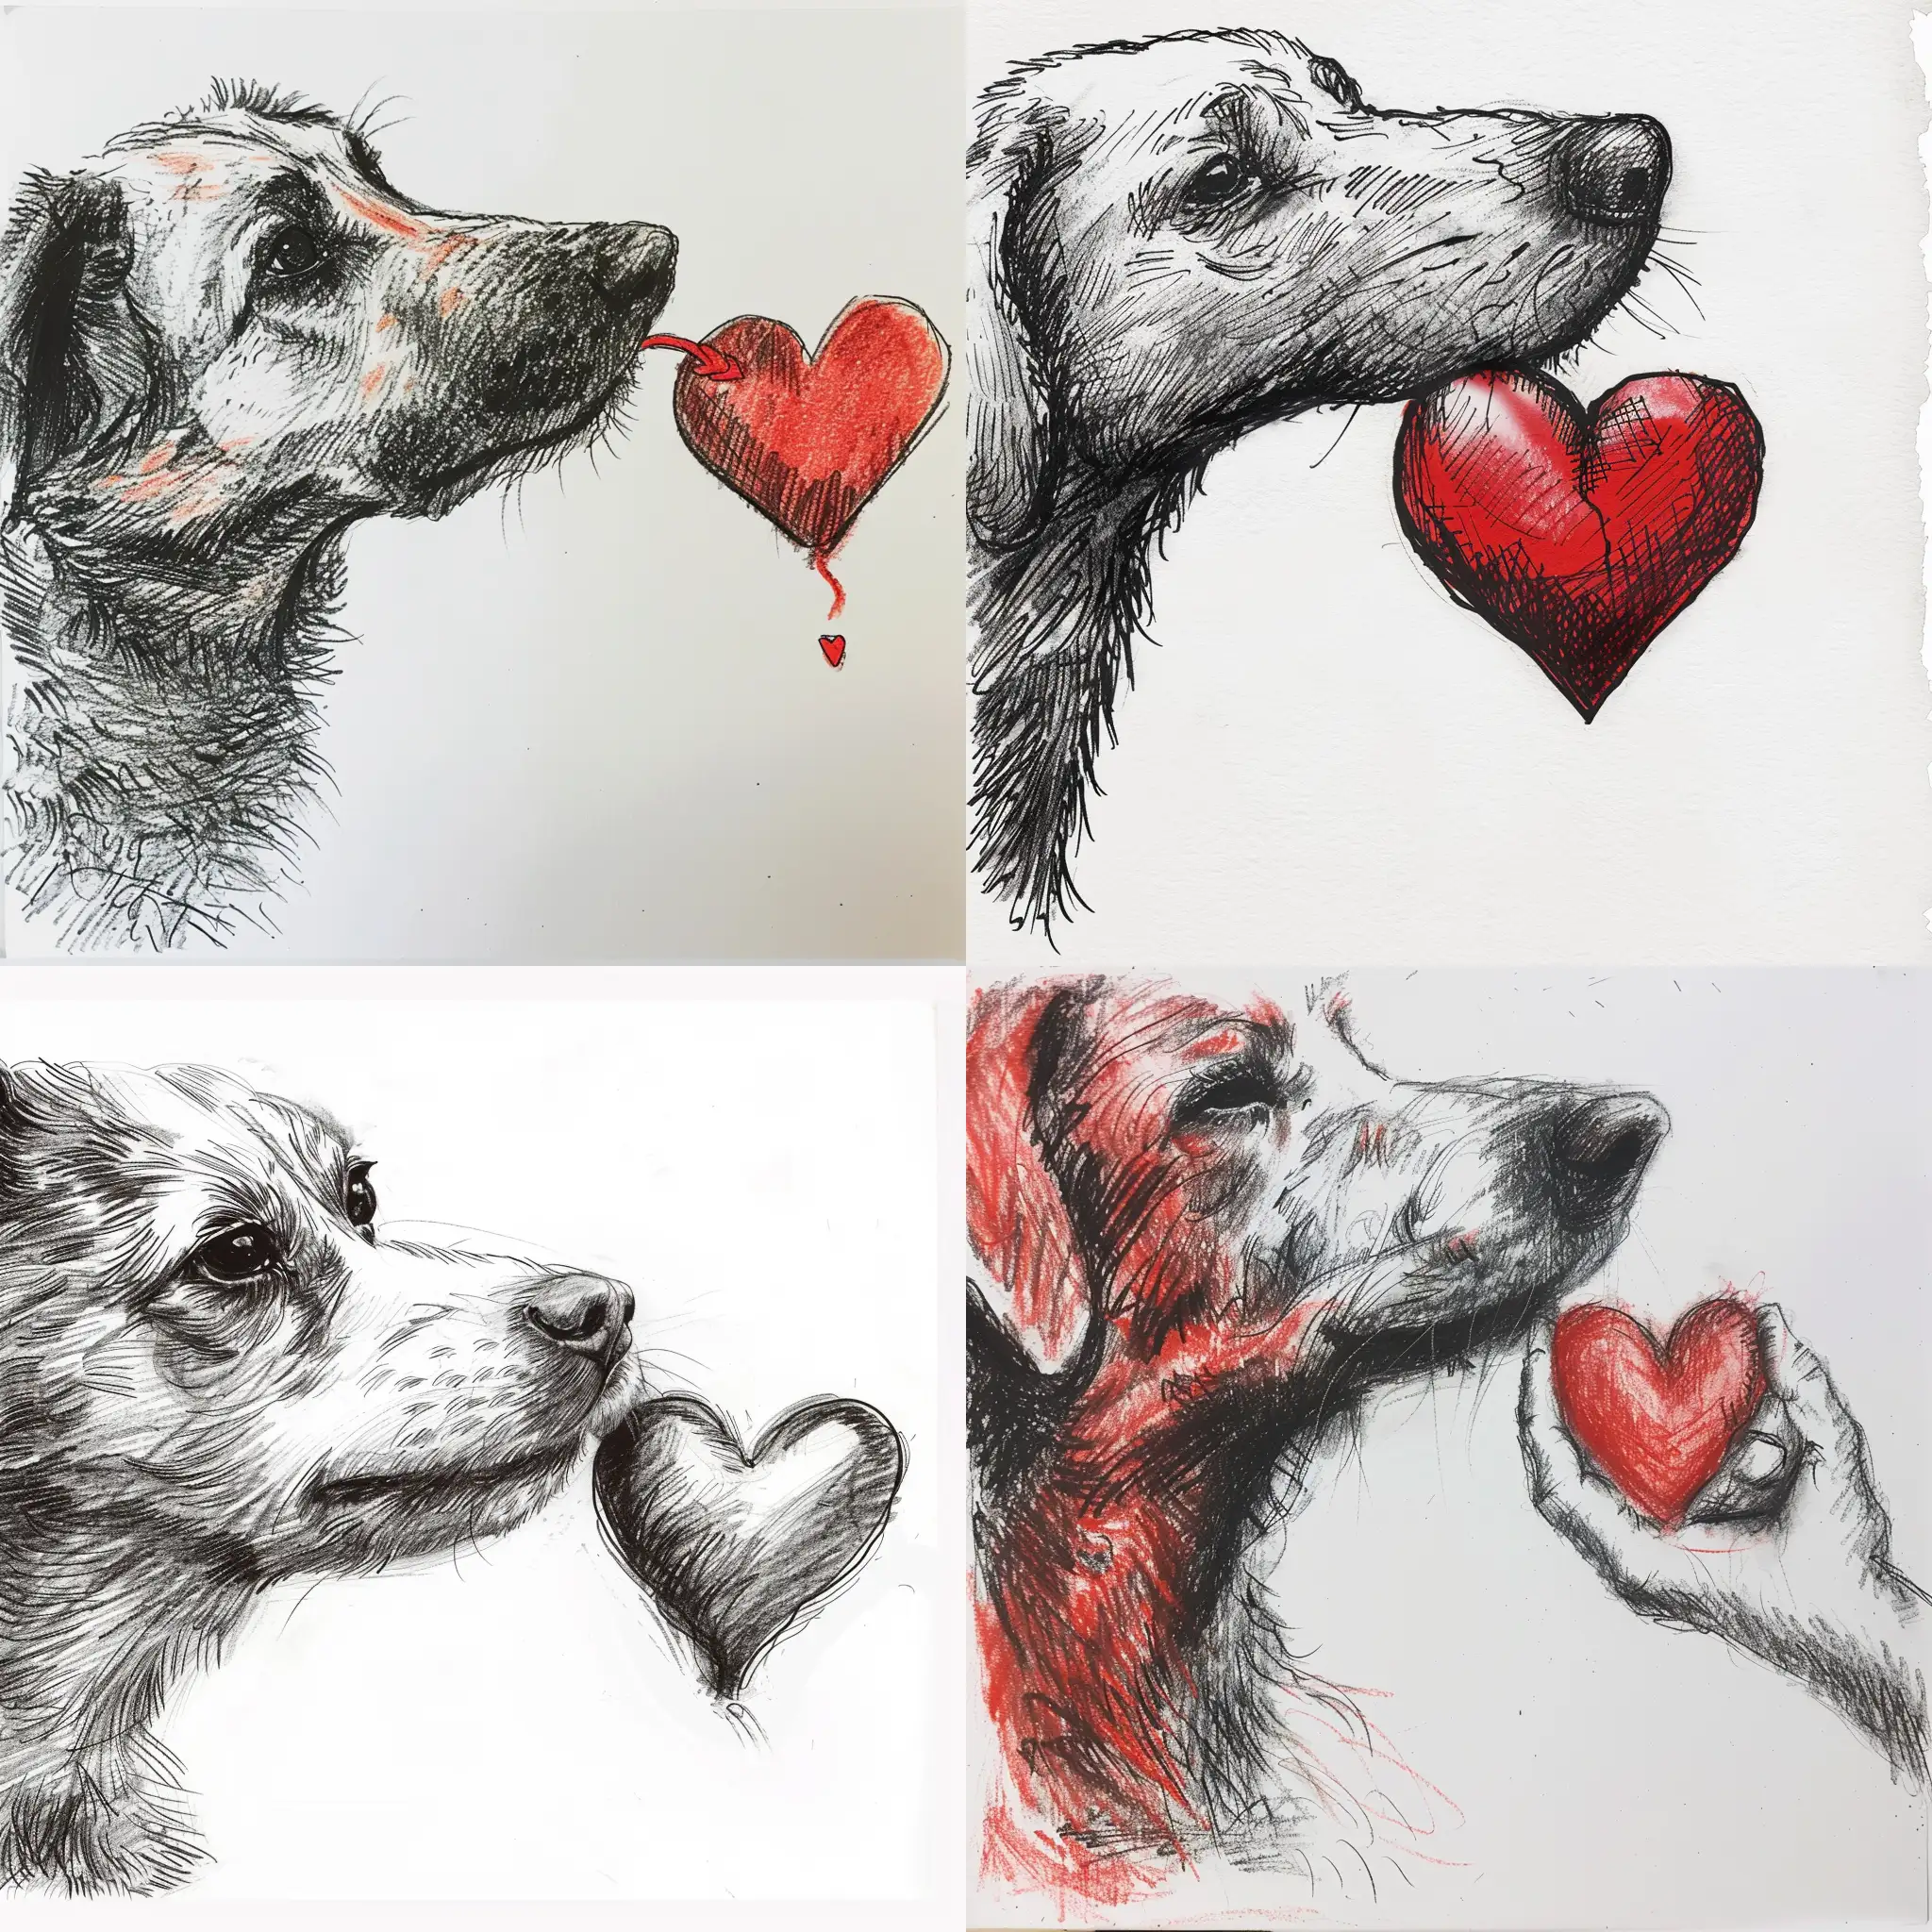 A drowing of a dogs snout tuching a heart